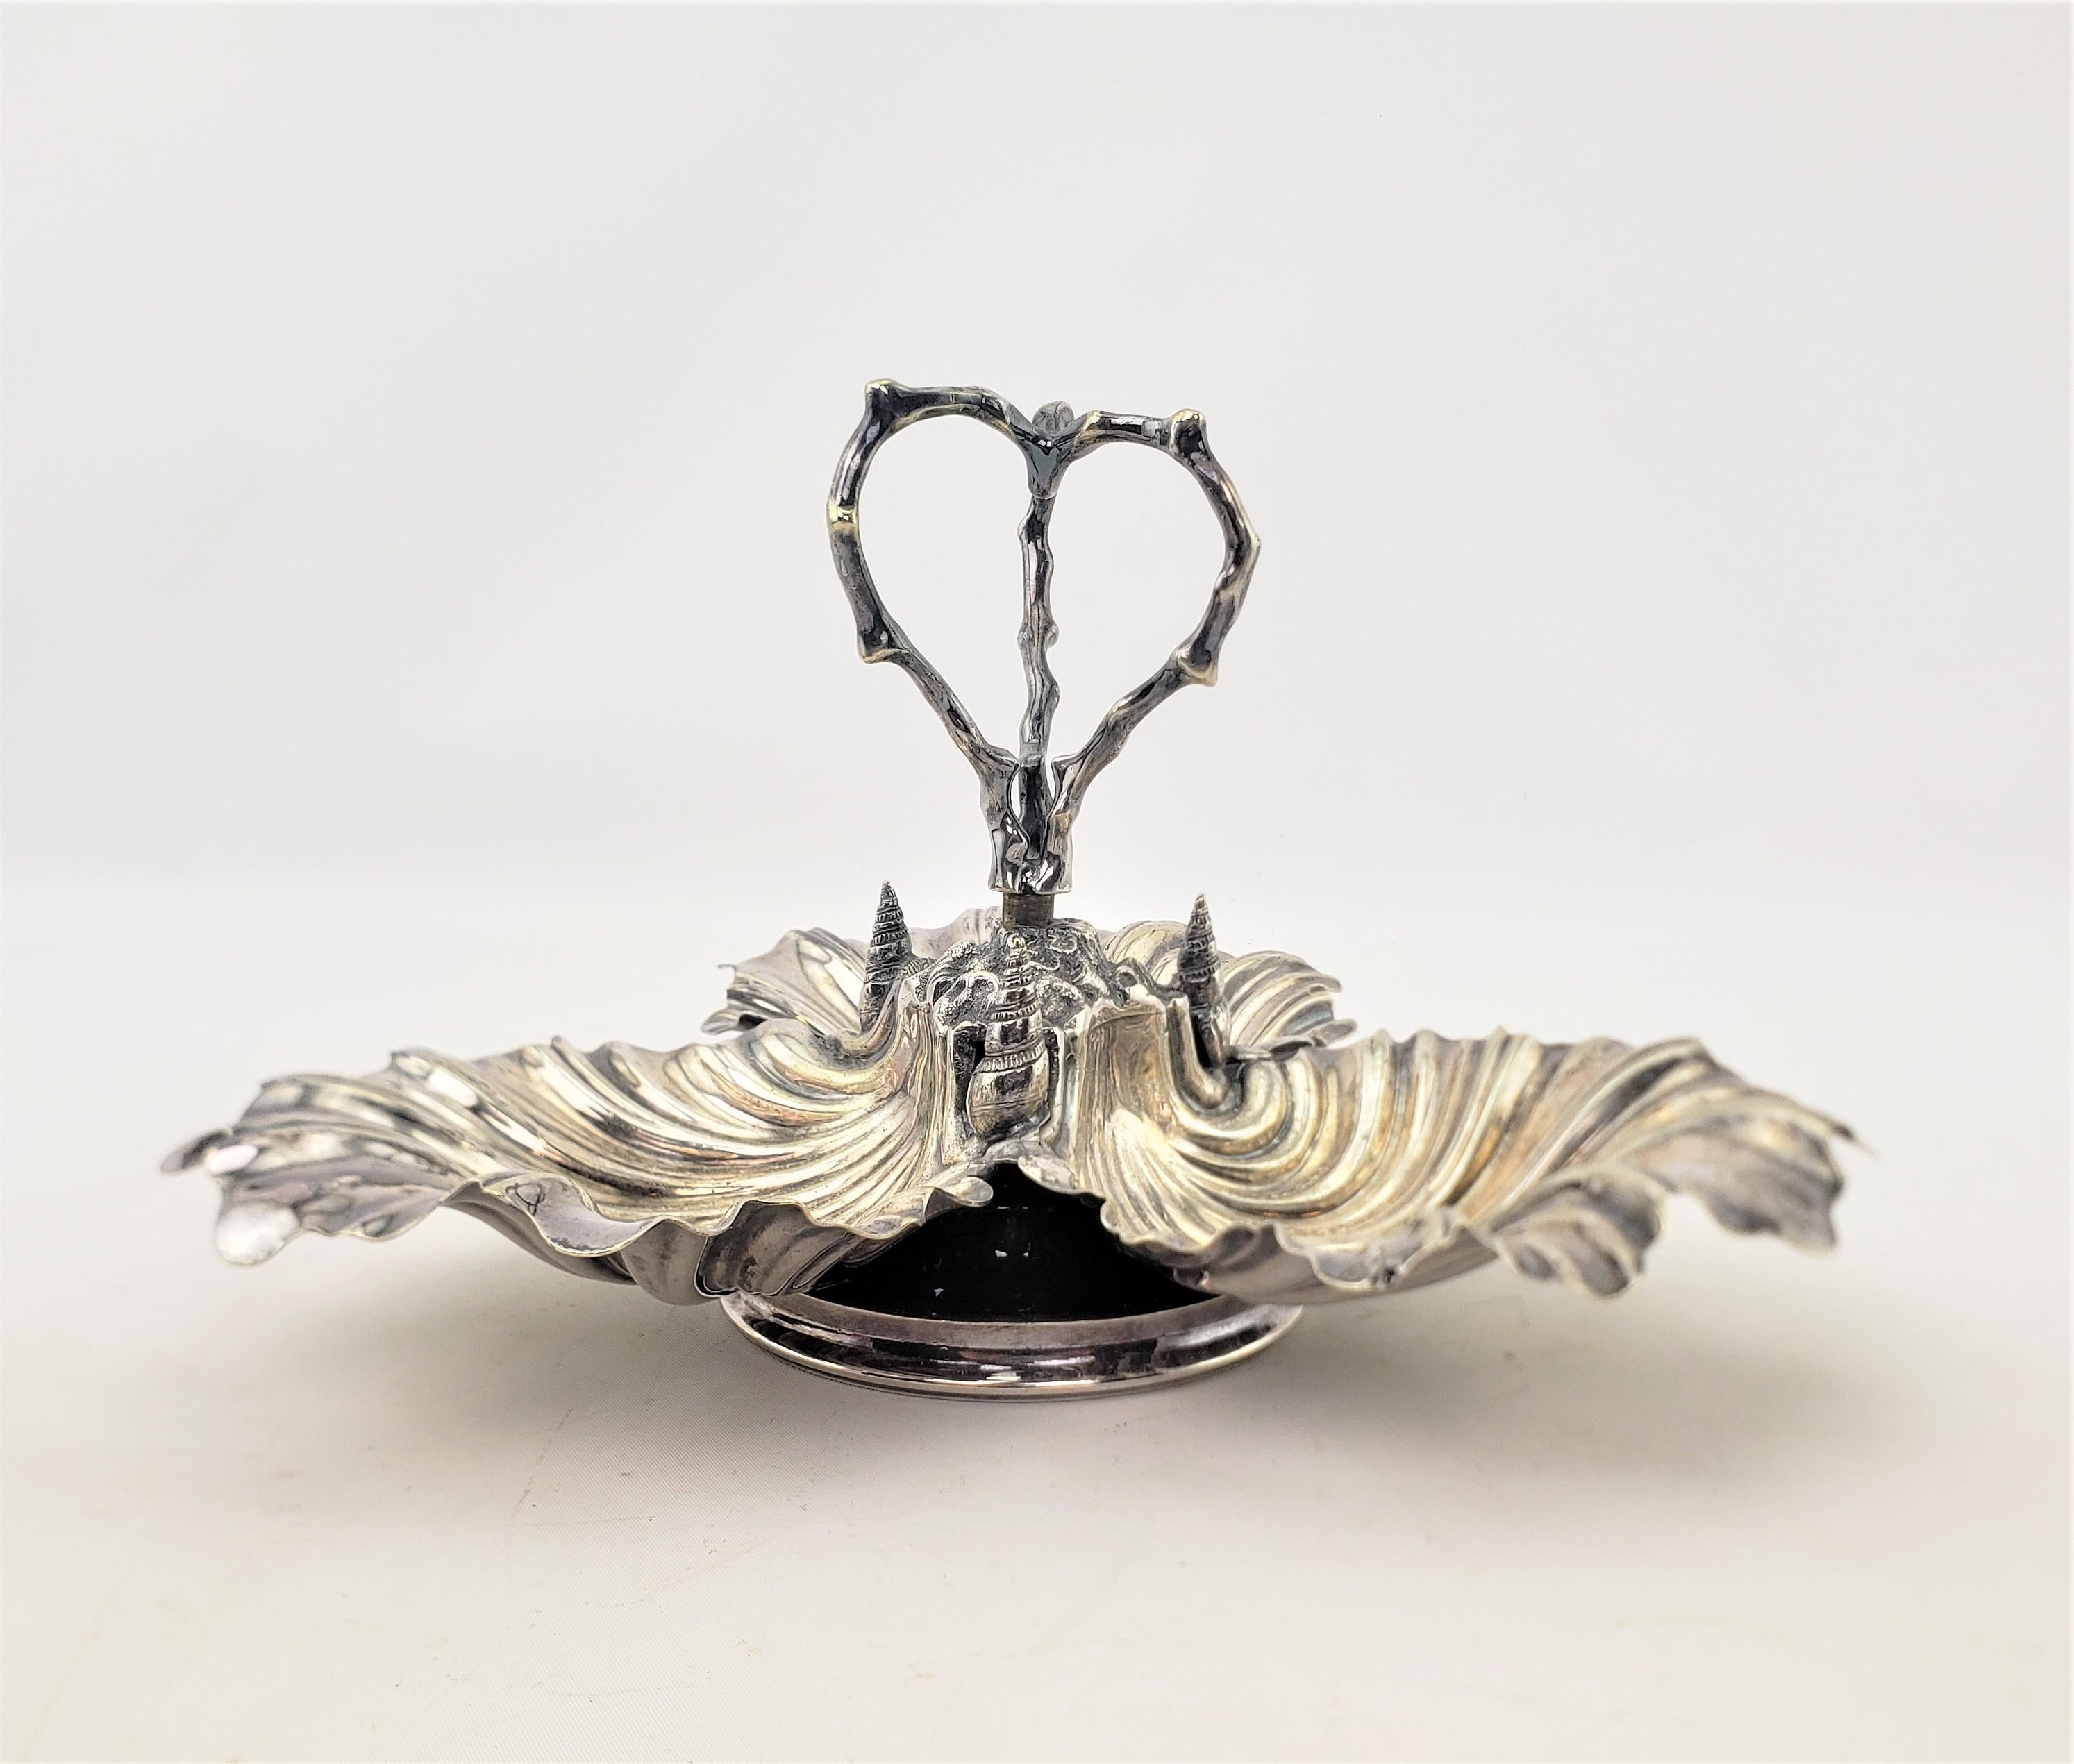 This antique serving dish is hallmarked by an unknown English maker, and believed to date to approximately 1910-1920 and done in a Victorian style. The dish is composed of copper with a silver plated finish and has three partitions using figural